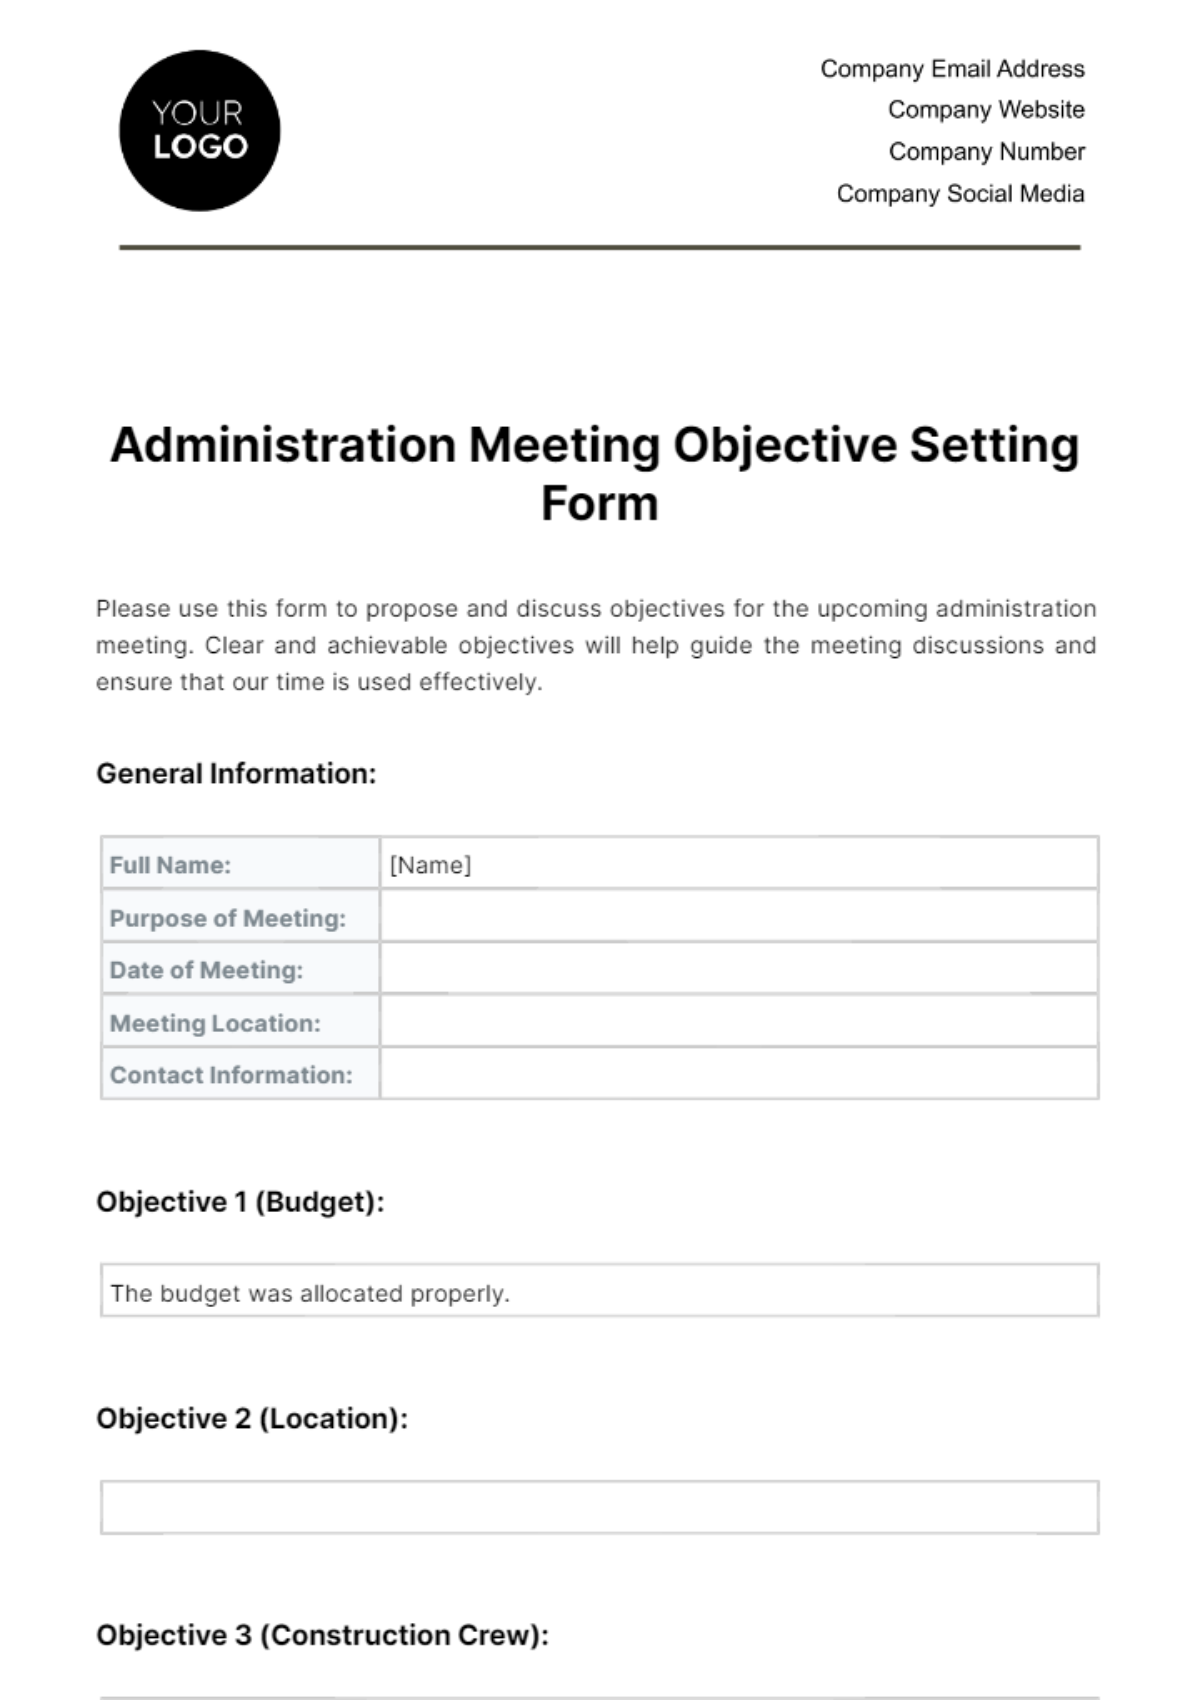 Administration Meeting Objective Setting Form Template